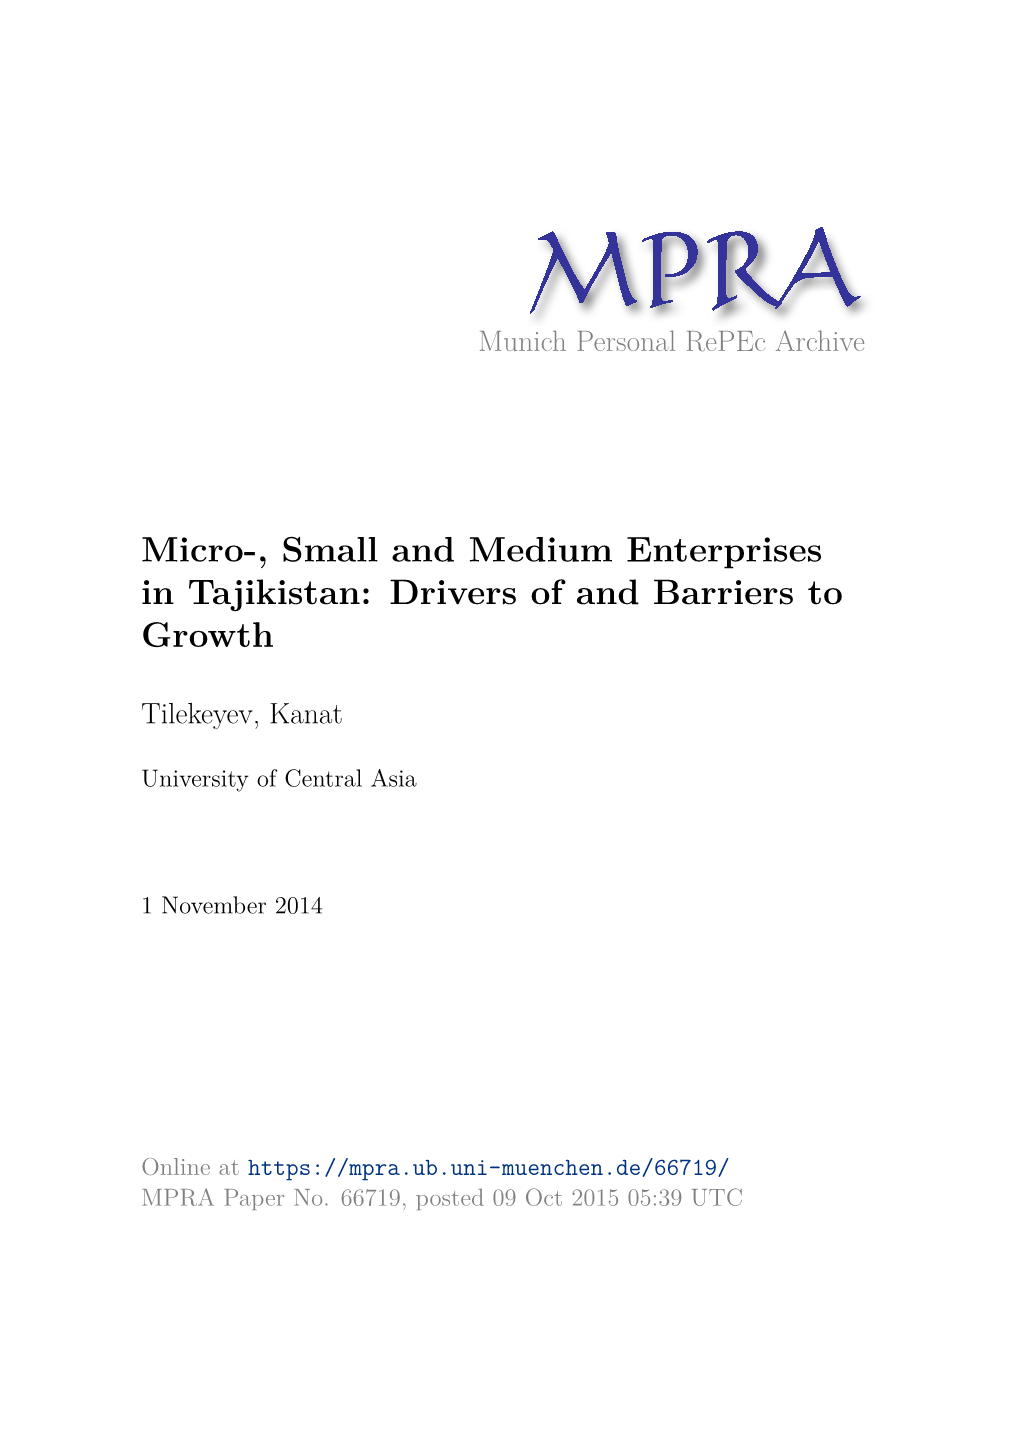 Micro-, Small and Medium Enterprises in Tajikistan: Drivers of and Barriers to Growth